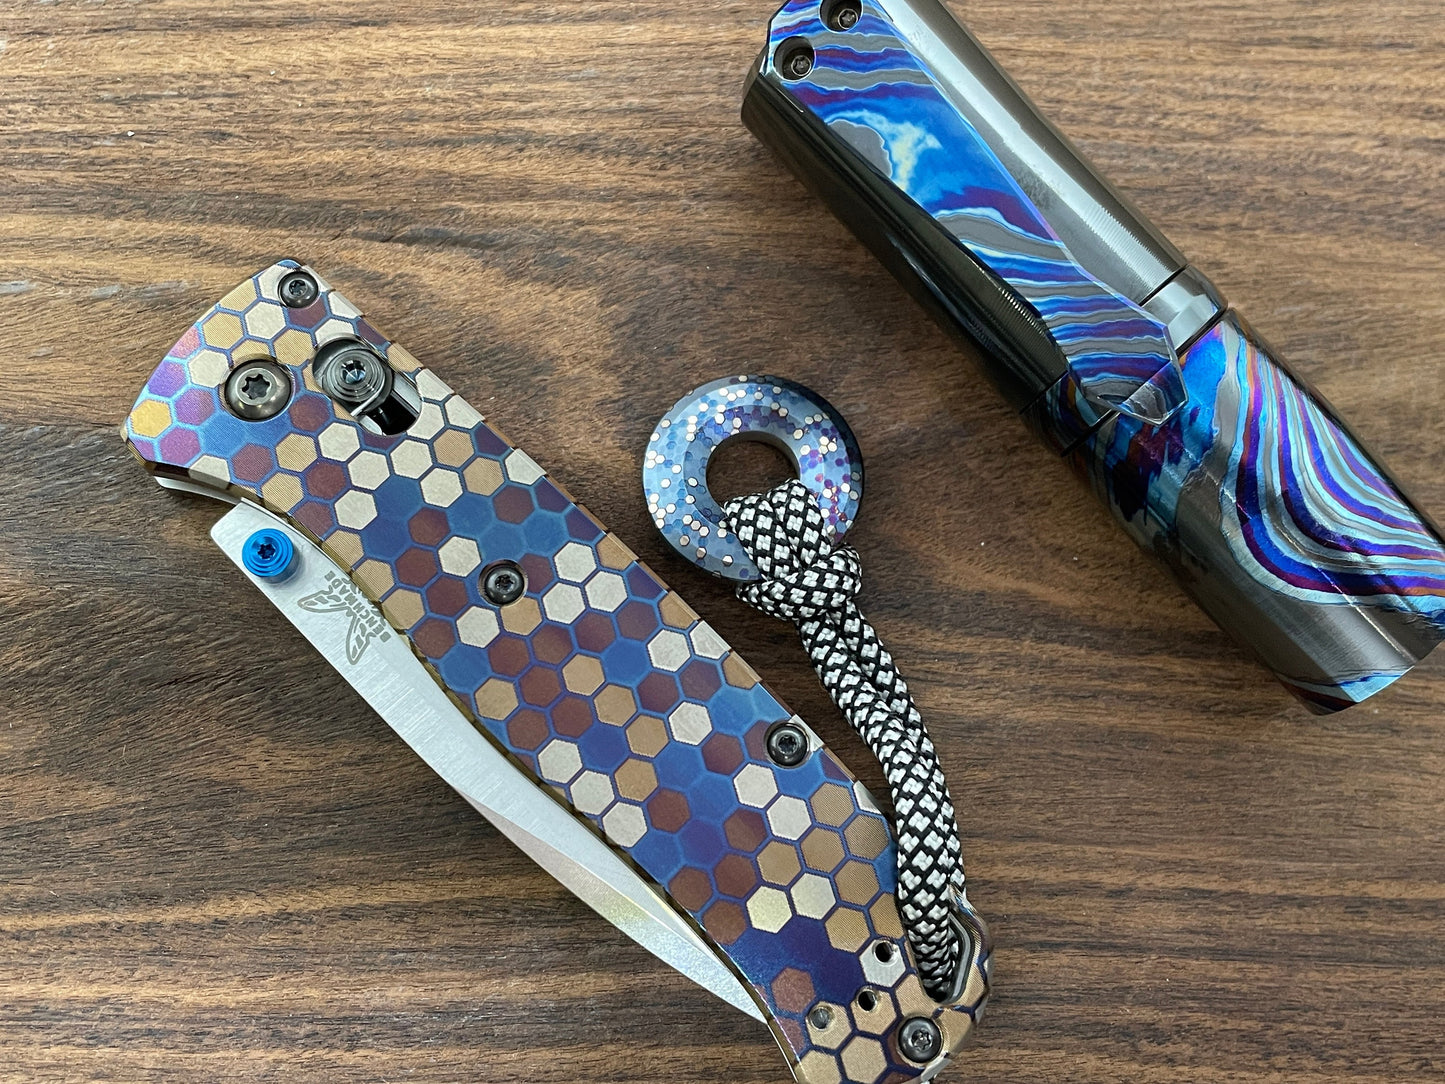 HONEYCOMB anodized Titanium Scales for Benchmade Bugout 535